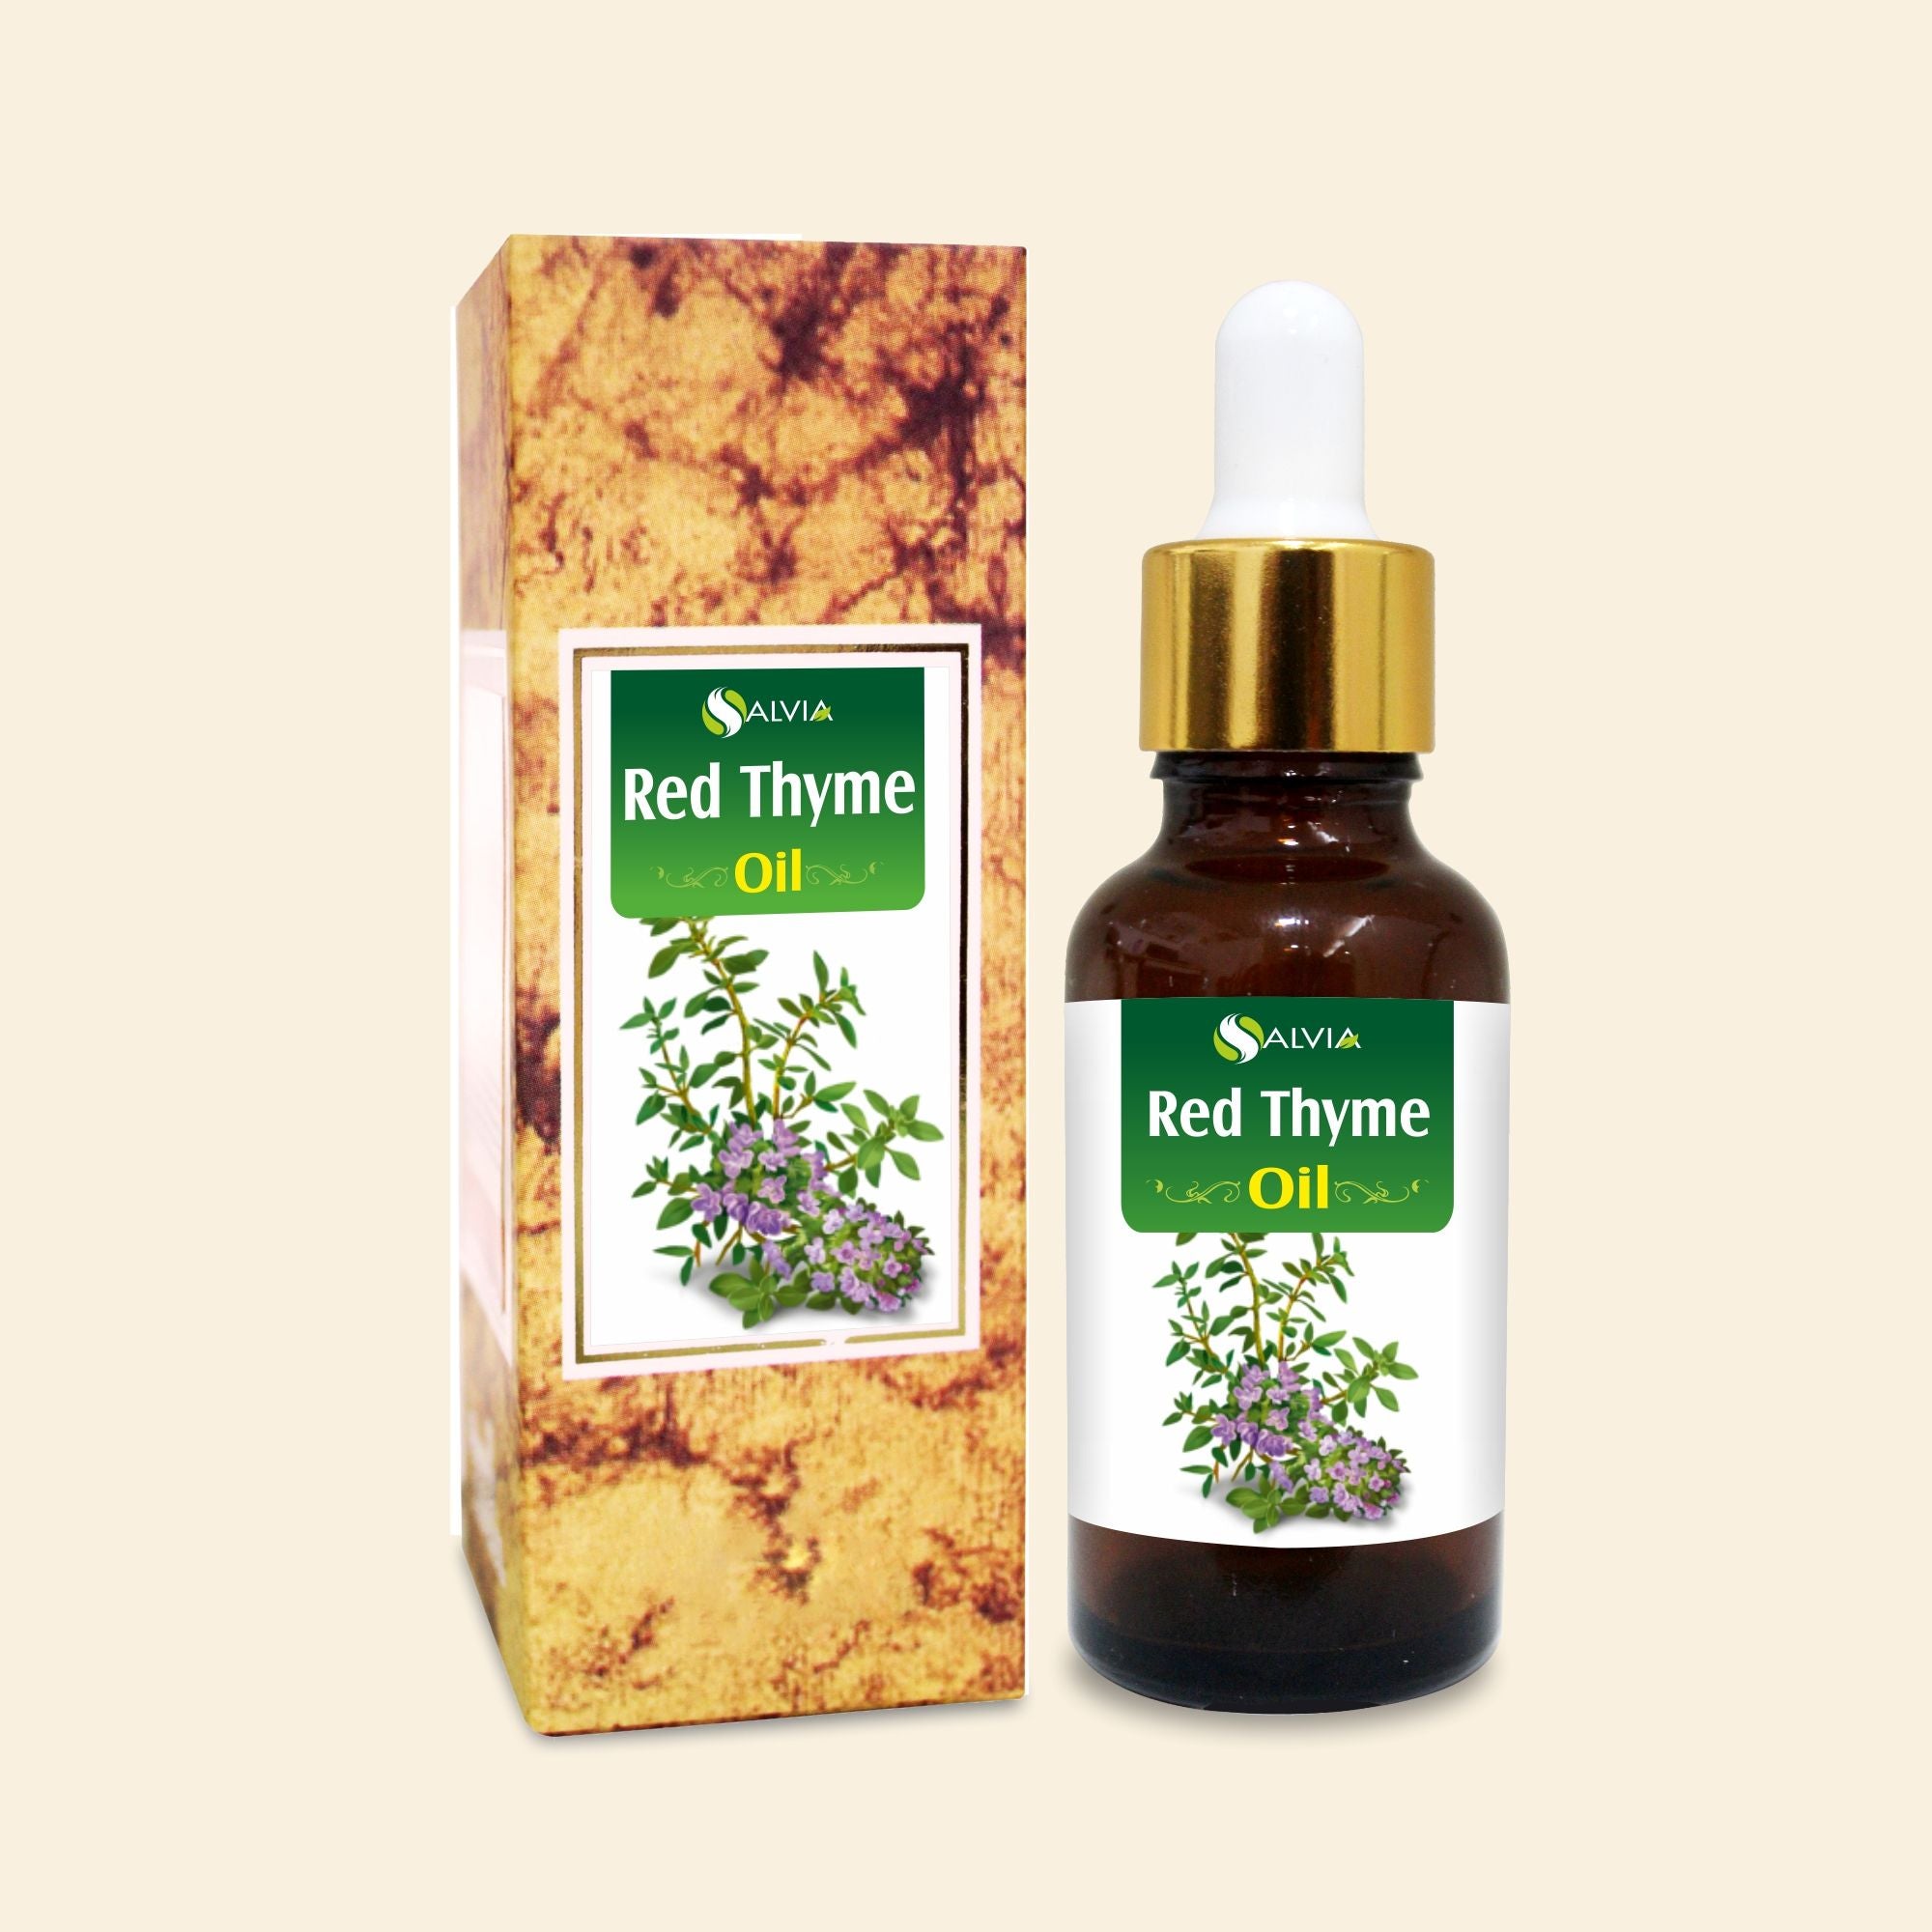 Salvia Natural Essential Oils Red Thyme (Thymus Vulgaris) Pure & Undiluted Essential Oil